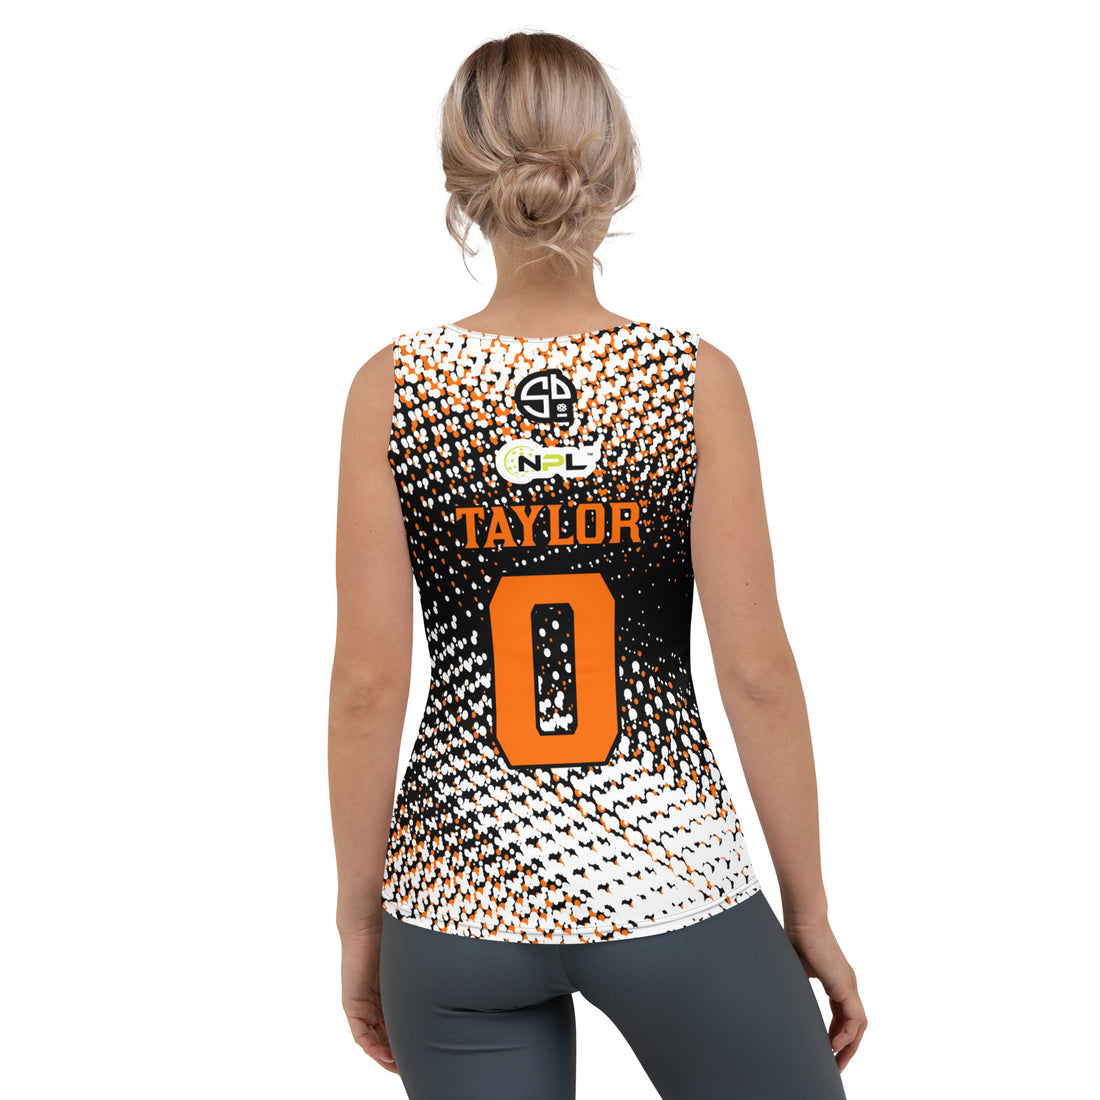 Taylor Taylor 0 Austin Ignite™ SKYblue™ 2023 Authentic Sleeveless Jersey in Black, Orange & White